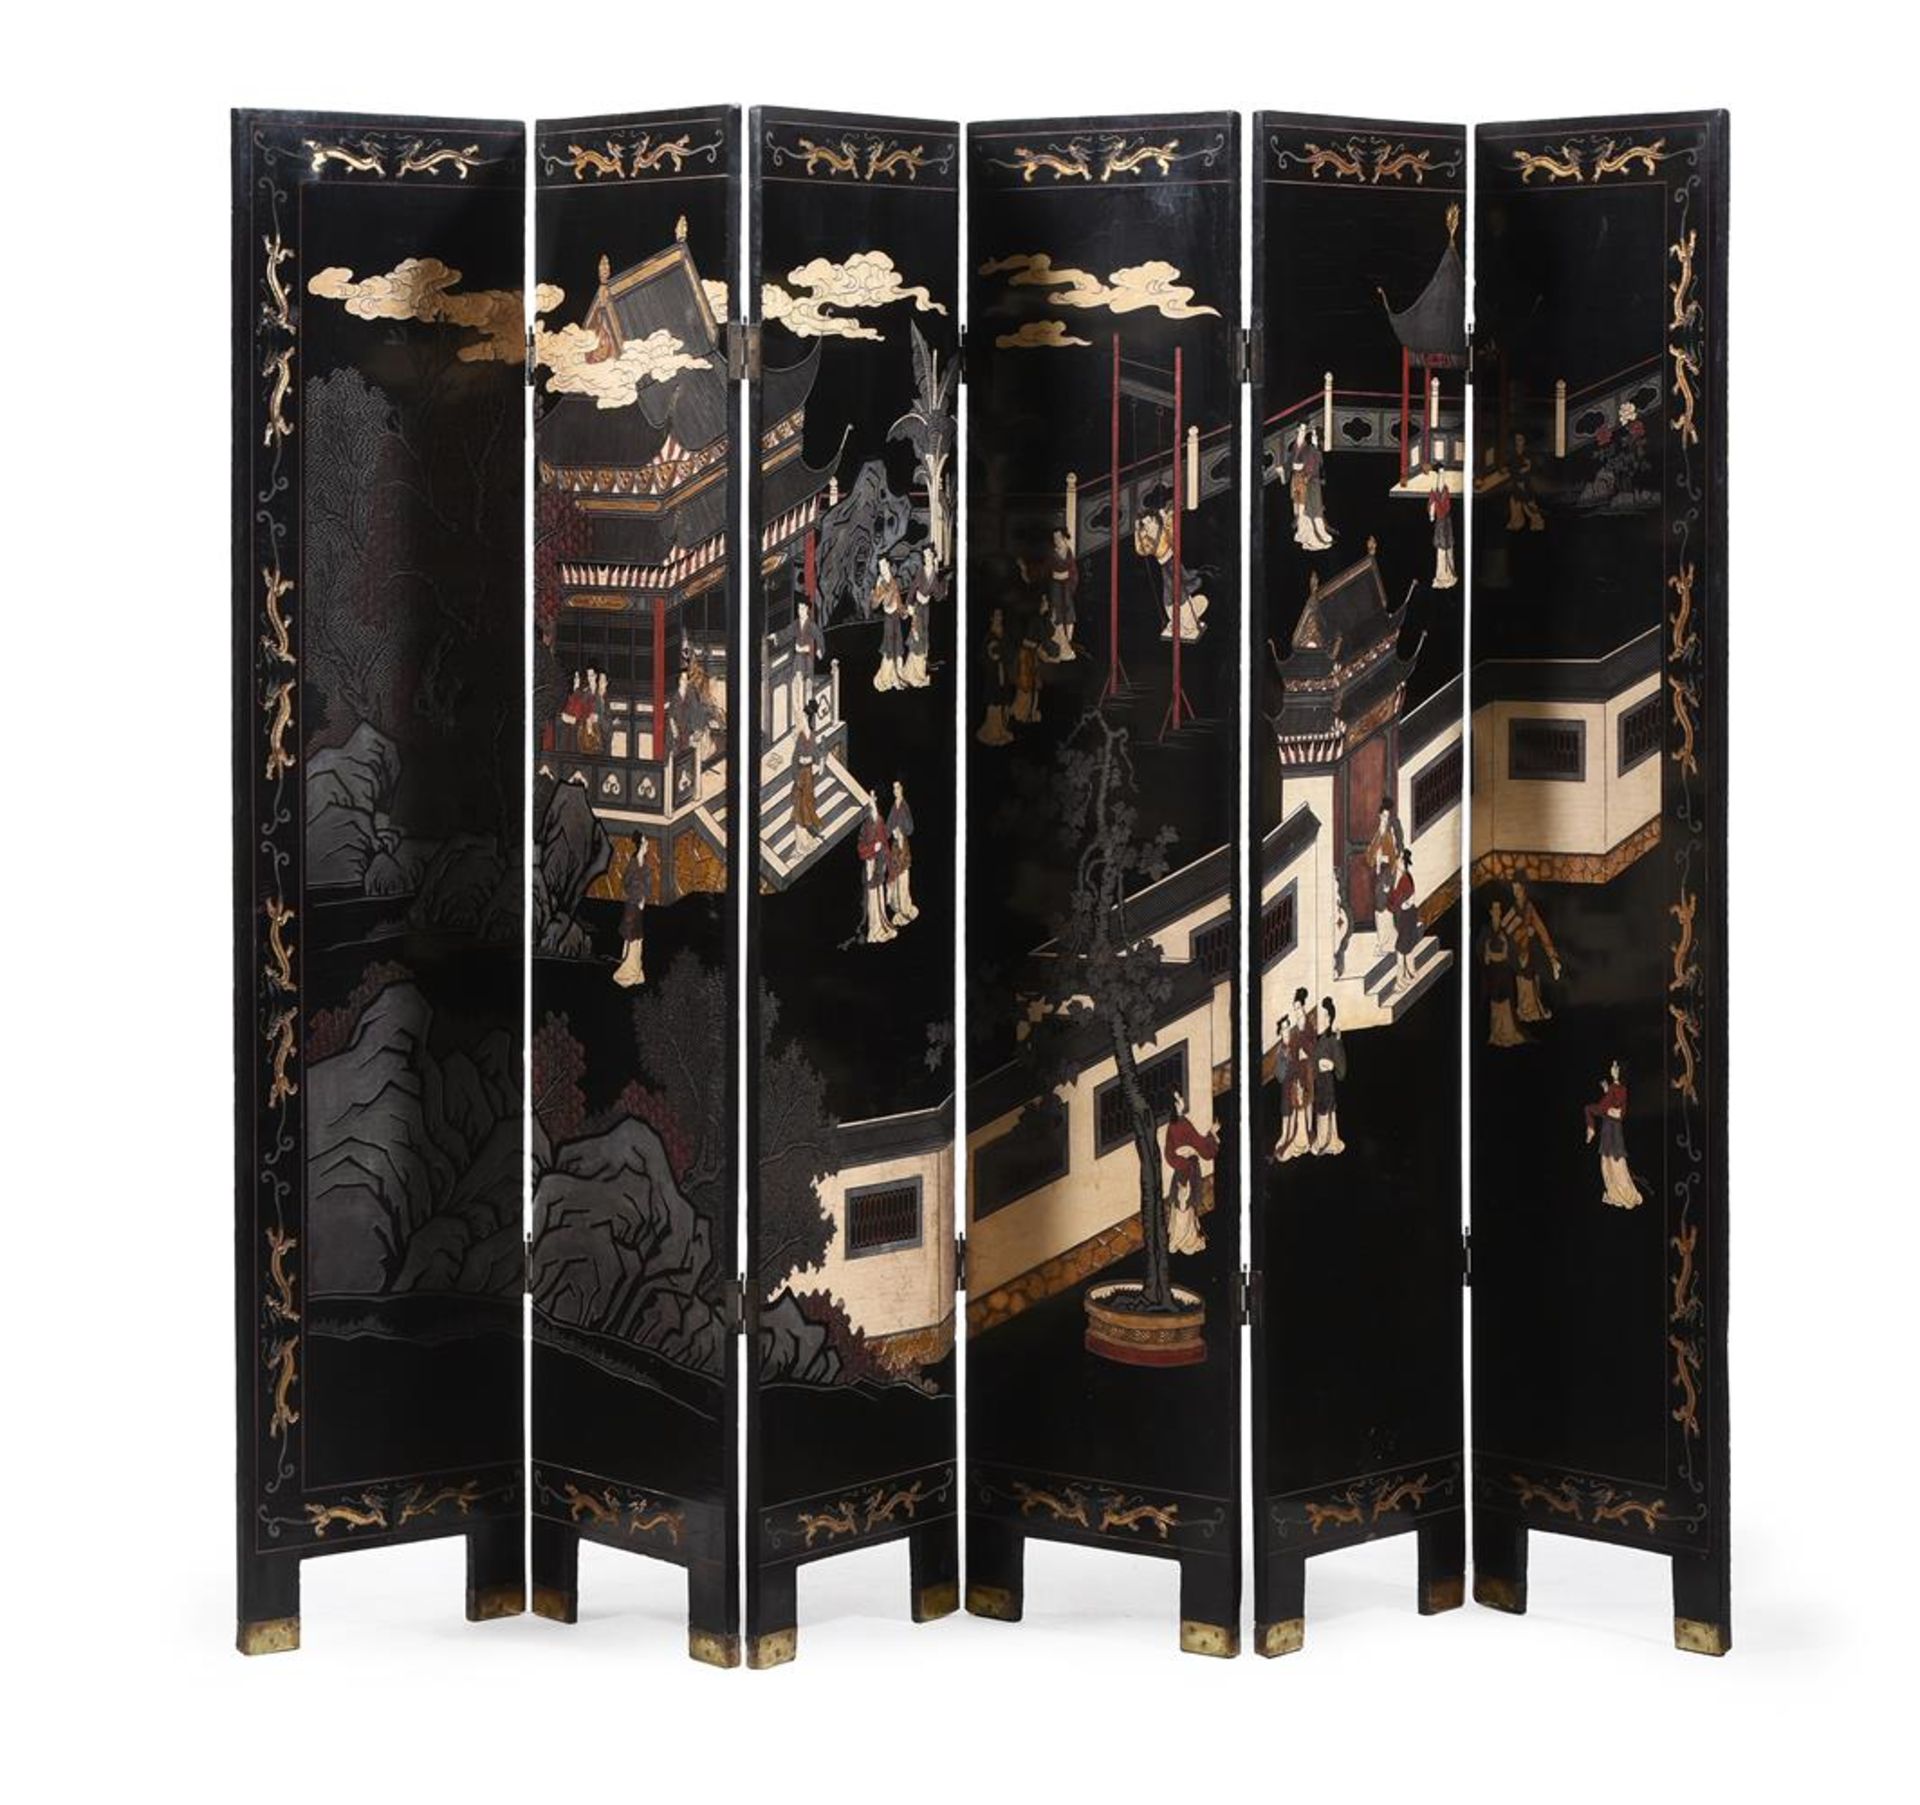 A JAPANESE BLACK LACQUER AND DECORATED SIX-FOLD SCREEN, MEIJI PERIOD